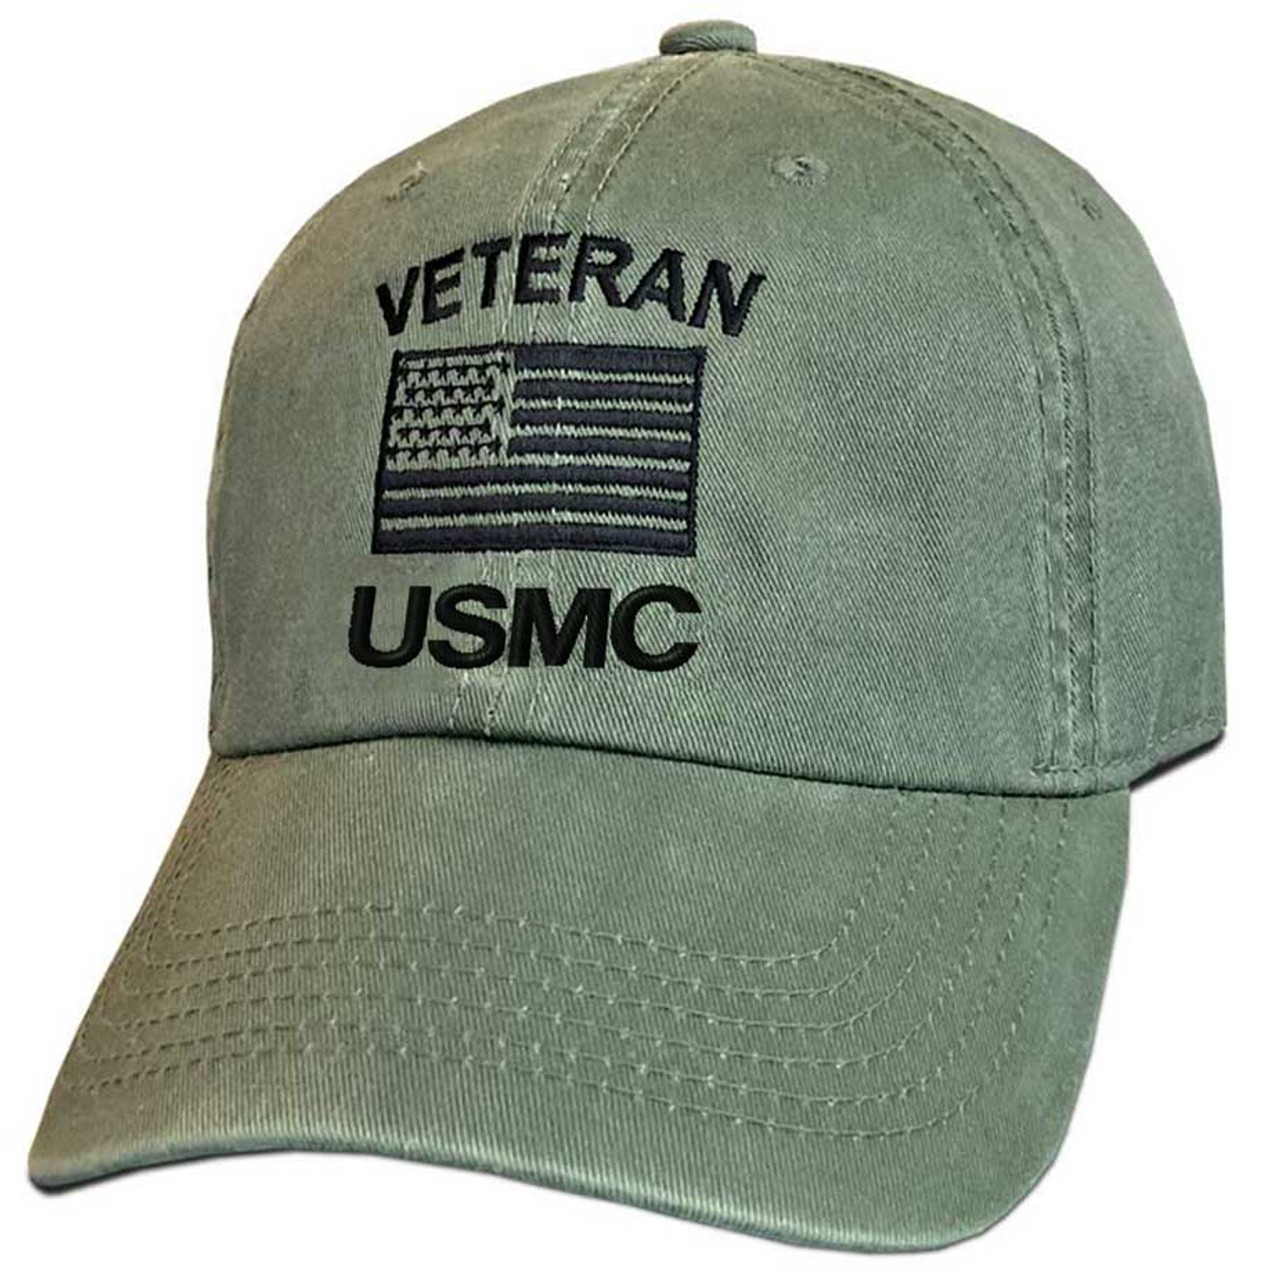 USMC Veteran Hat with Embroidered Flag